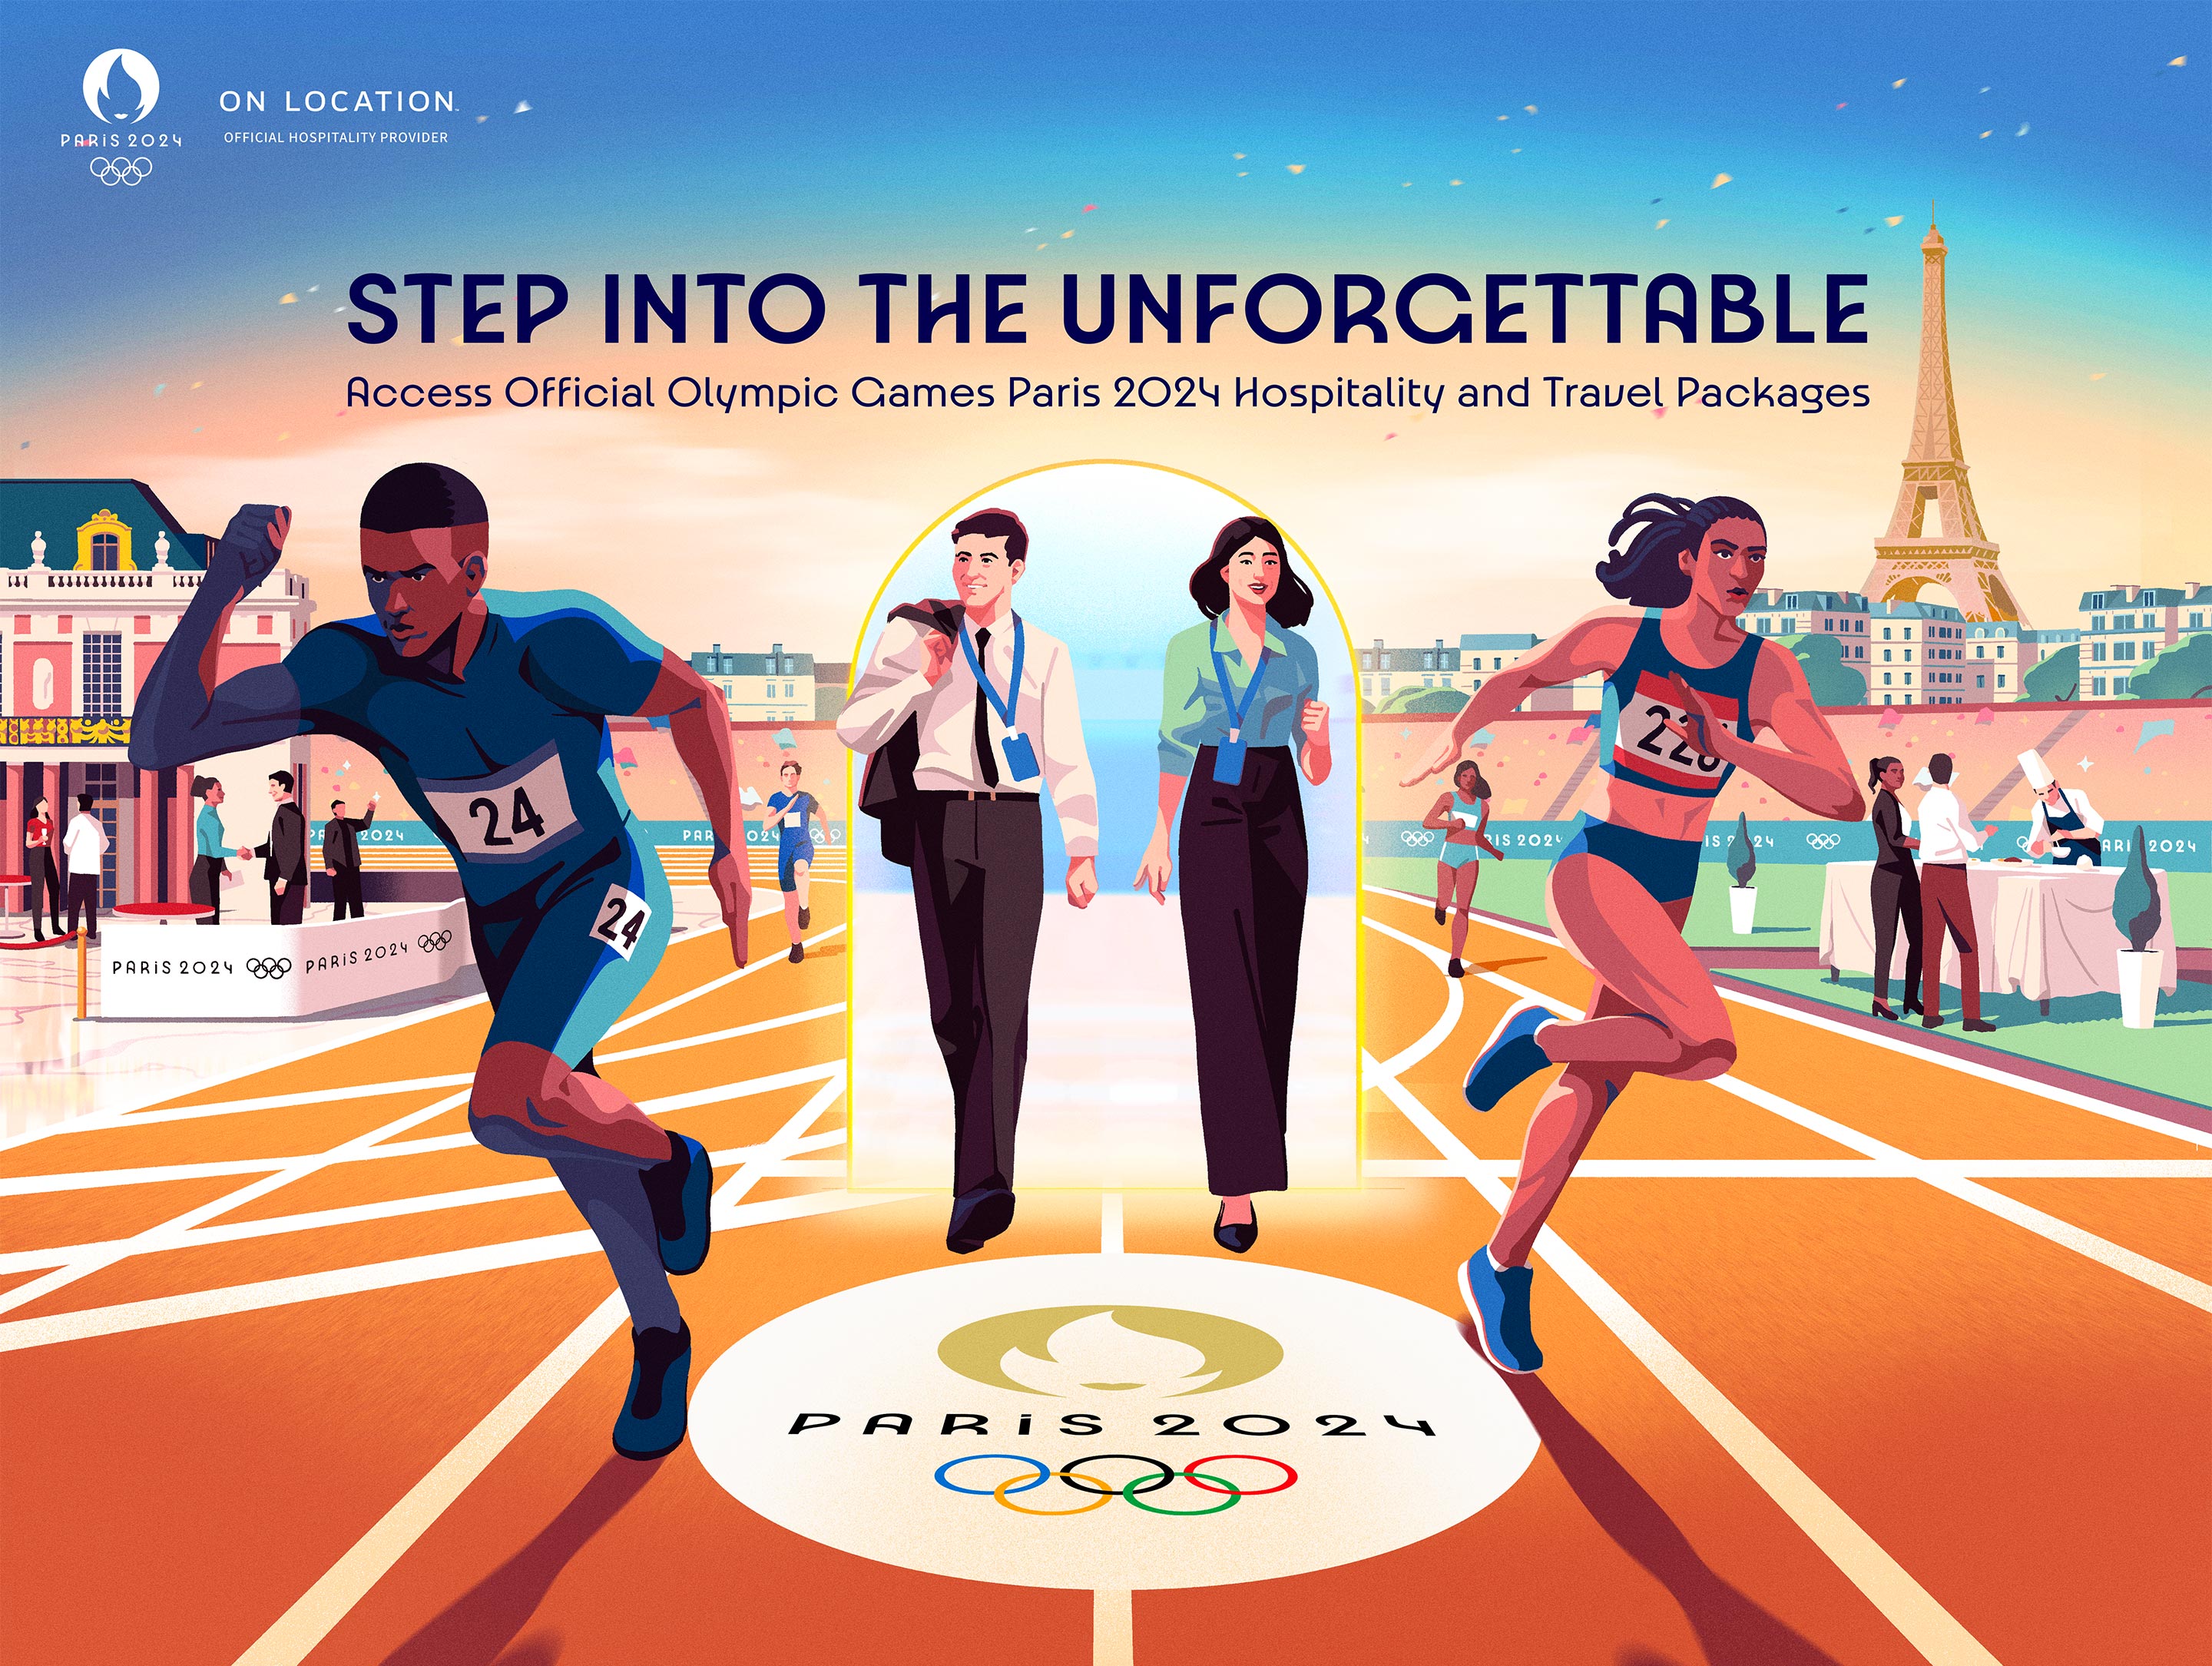 Olympic Games Paris 2024 hospitality platform opens for public sales